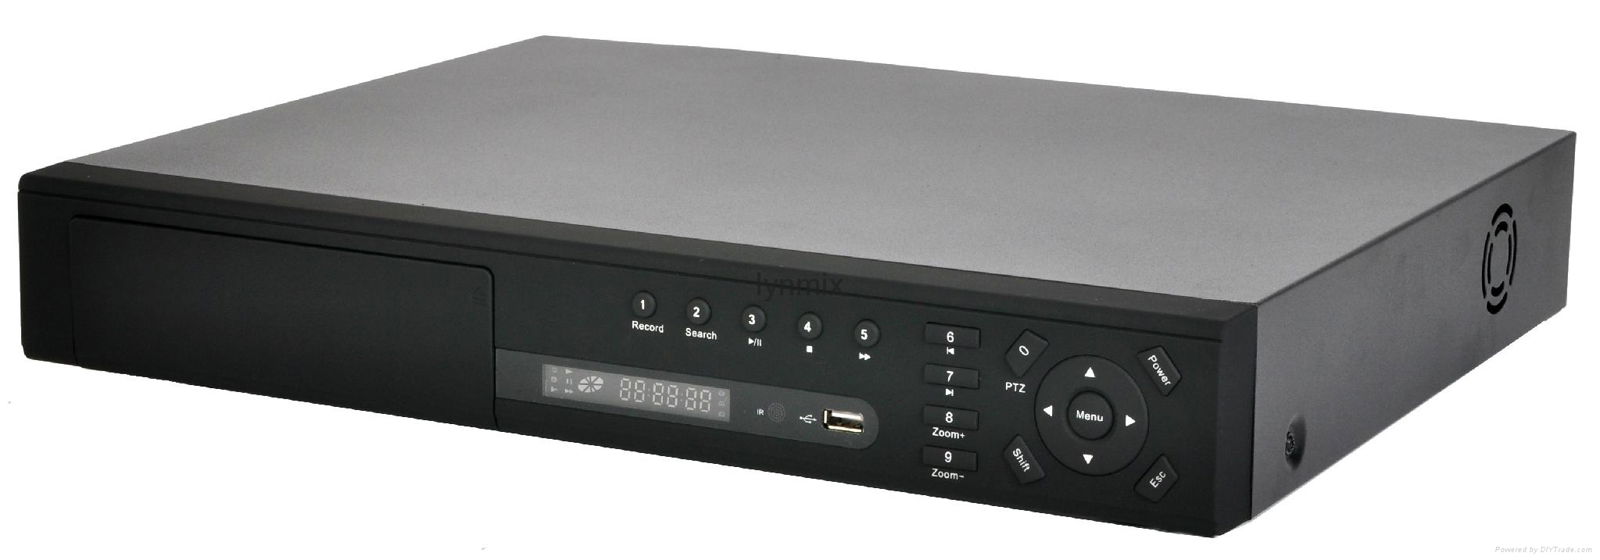 Seris 821 24CH/32CH 720P/1080P NVR with H.264 compression, 4 HDD,Industrial NVR